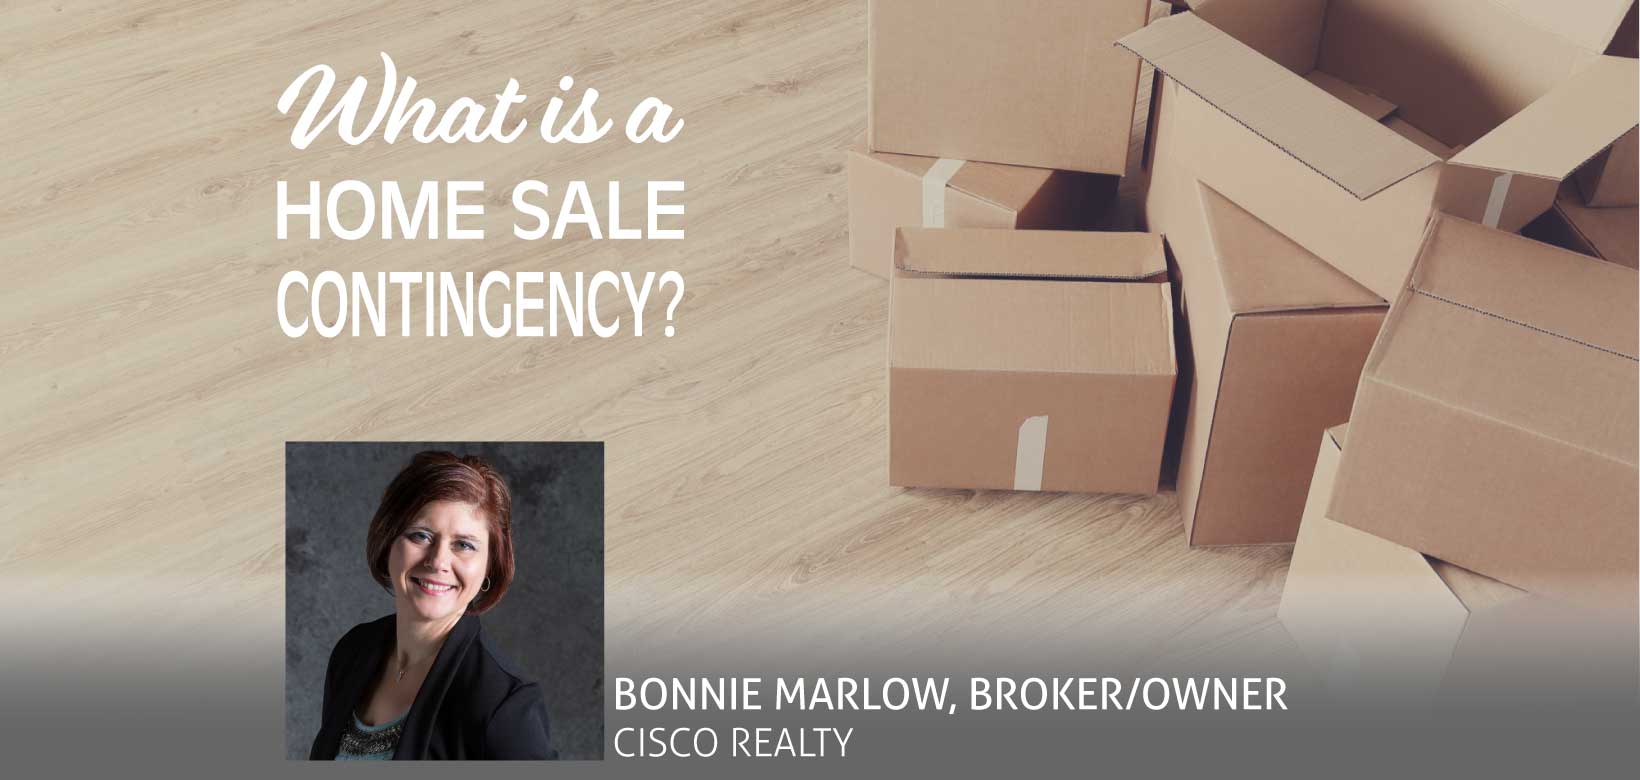 Realtor-Guest-Post-Bonnie-Marlow-Home-Sale-Contingency